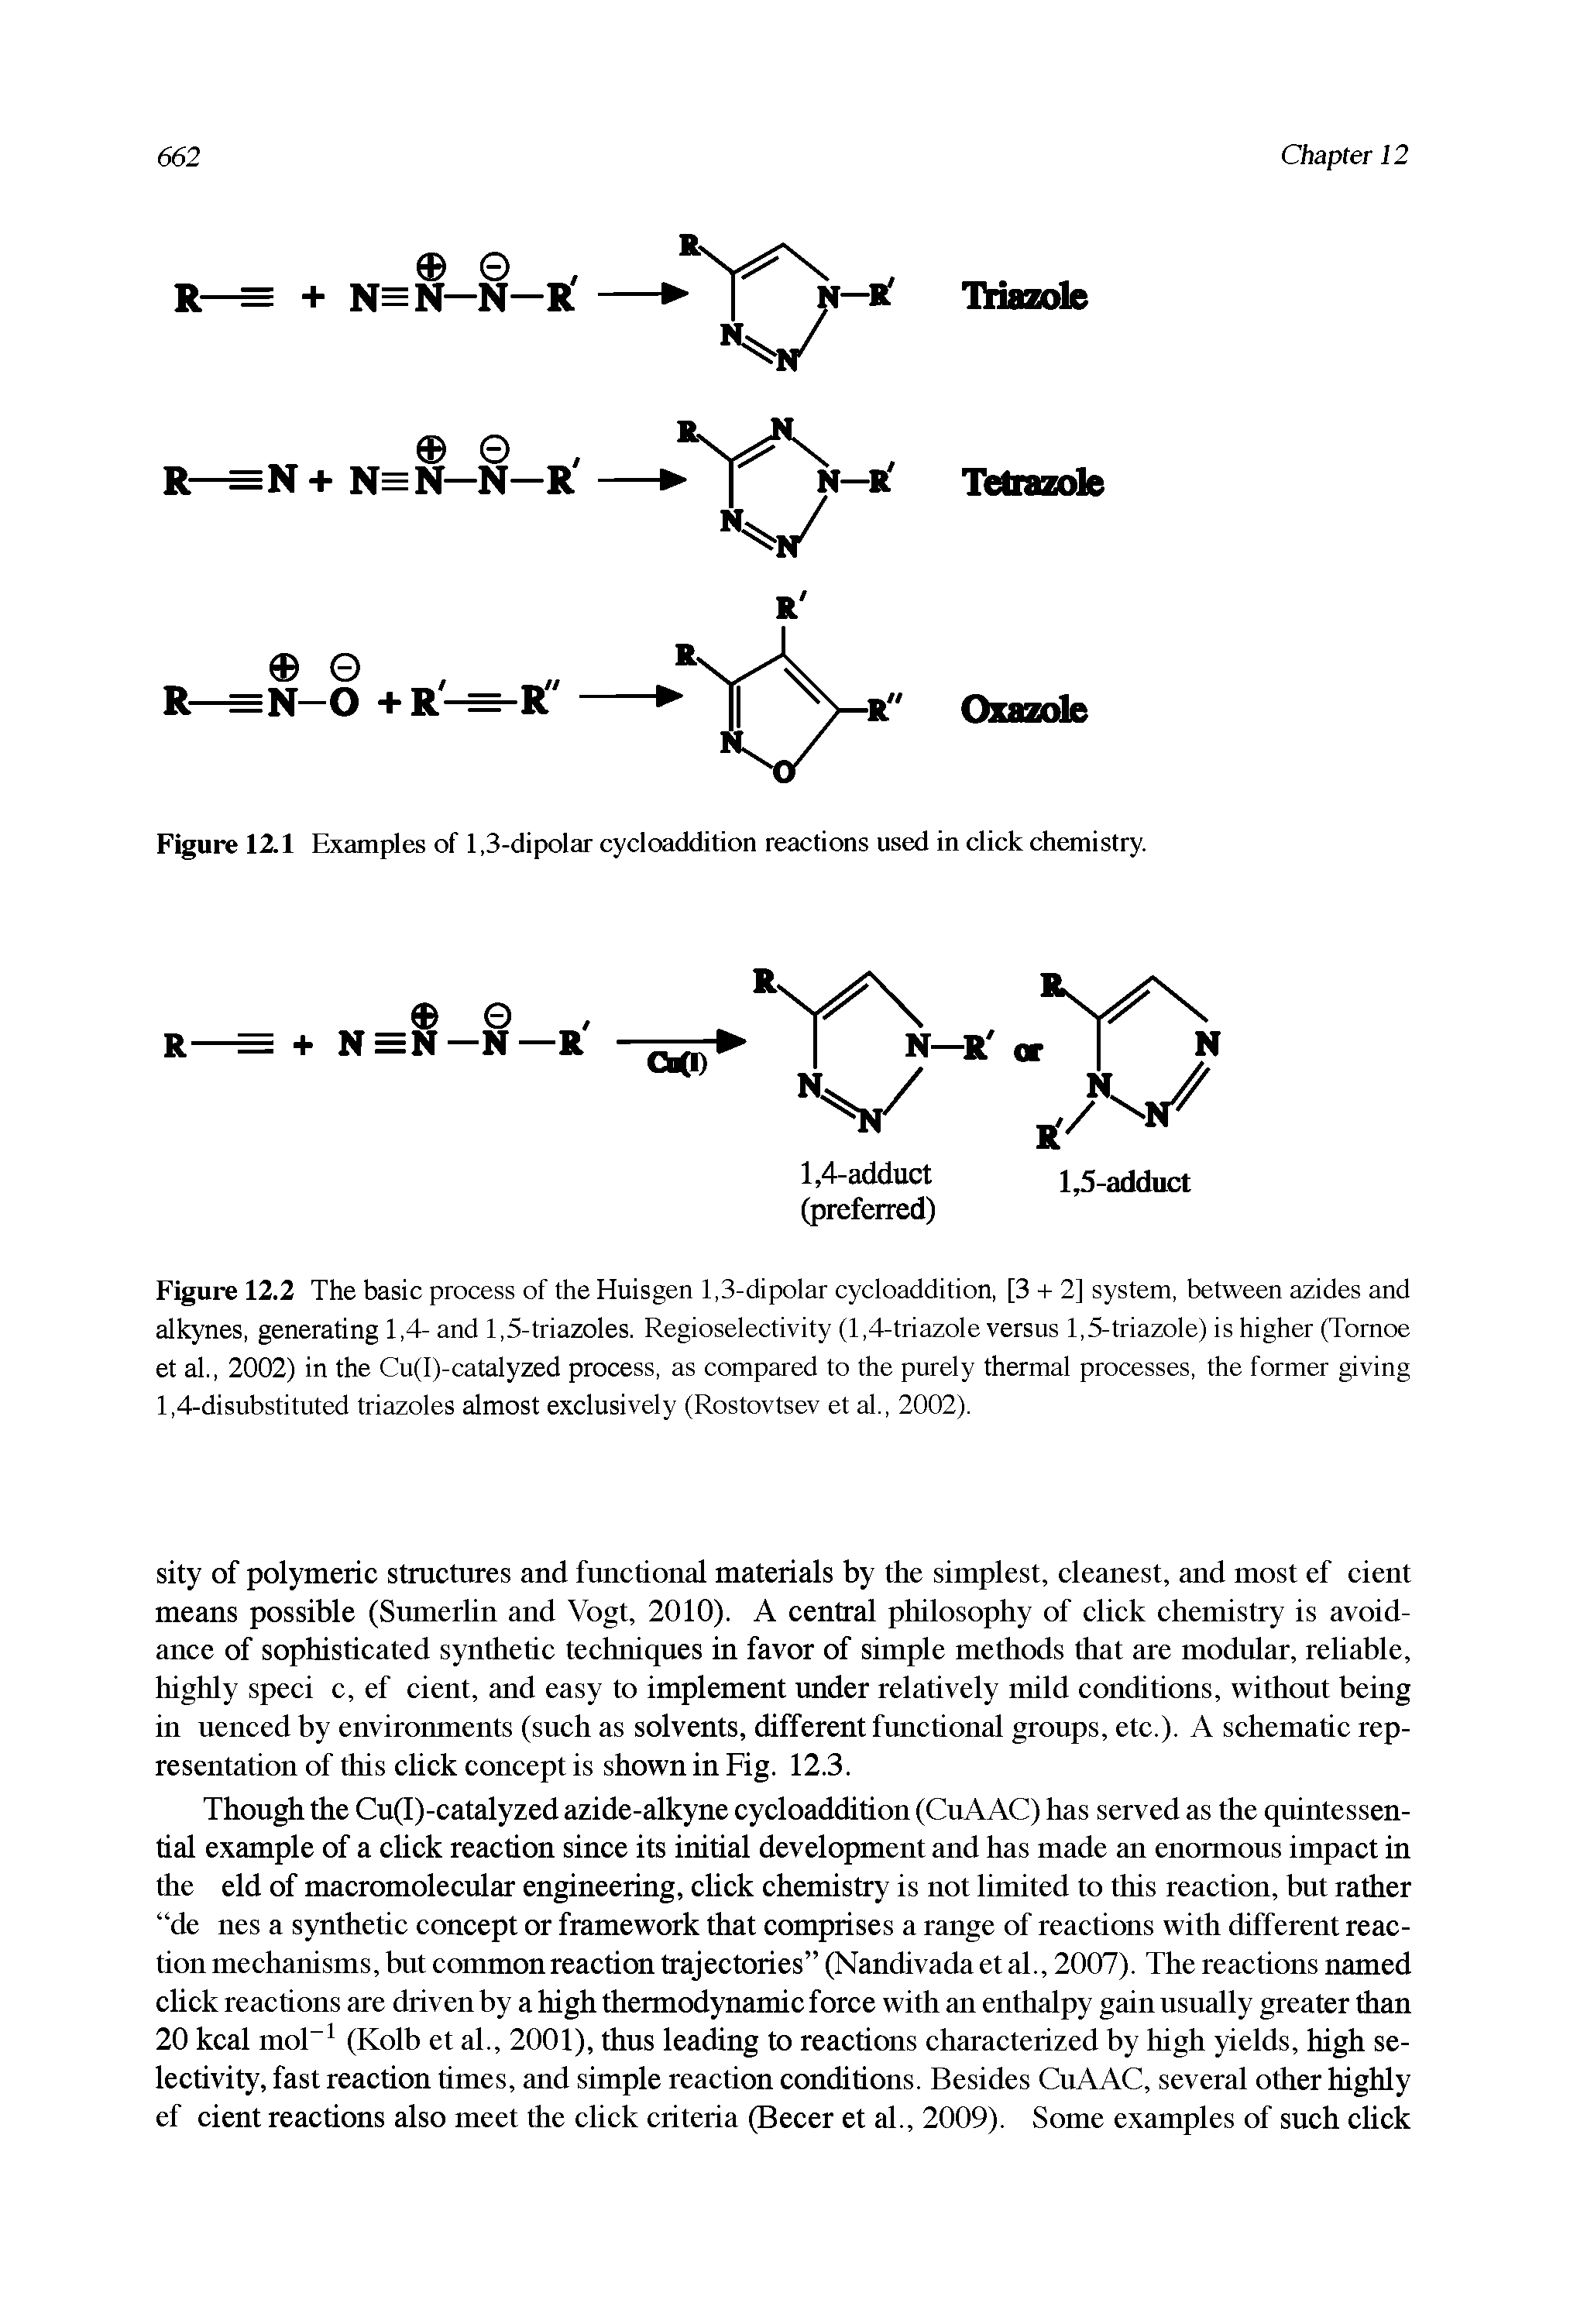 Figure 12.1 Examples of 1,3-dipolar cycloaddition reactions used in click chemistry.